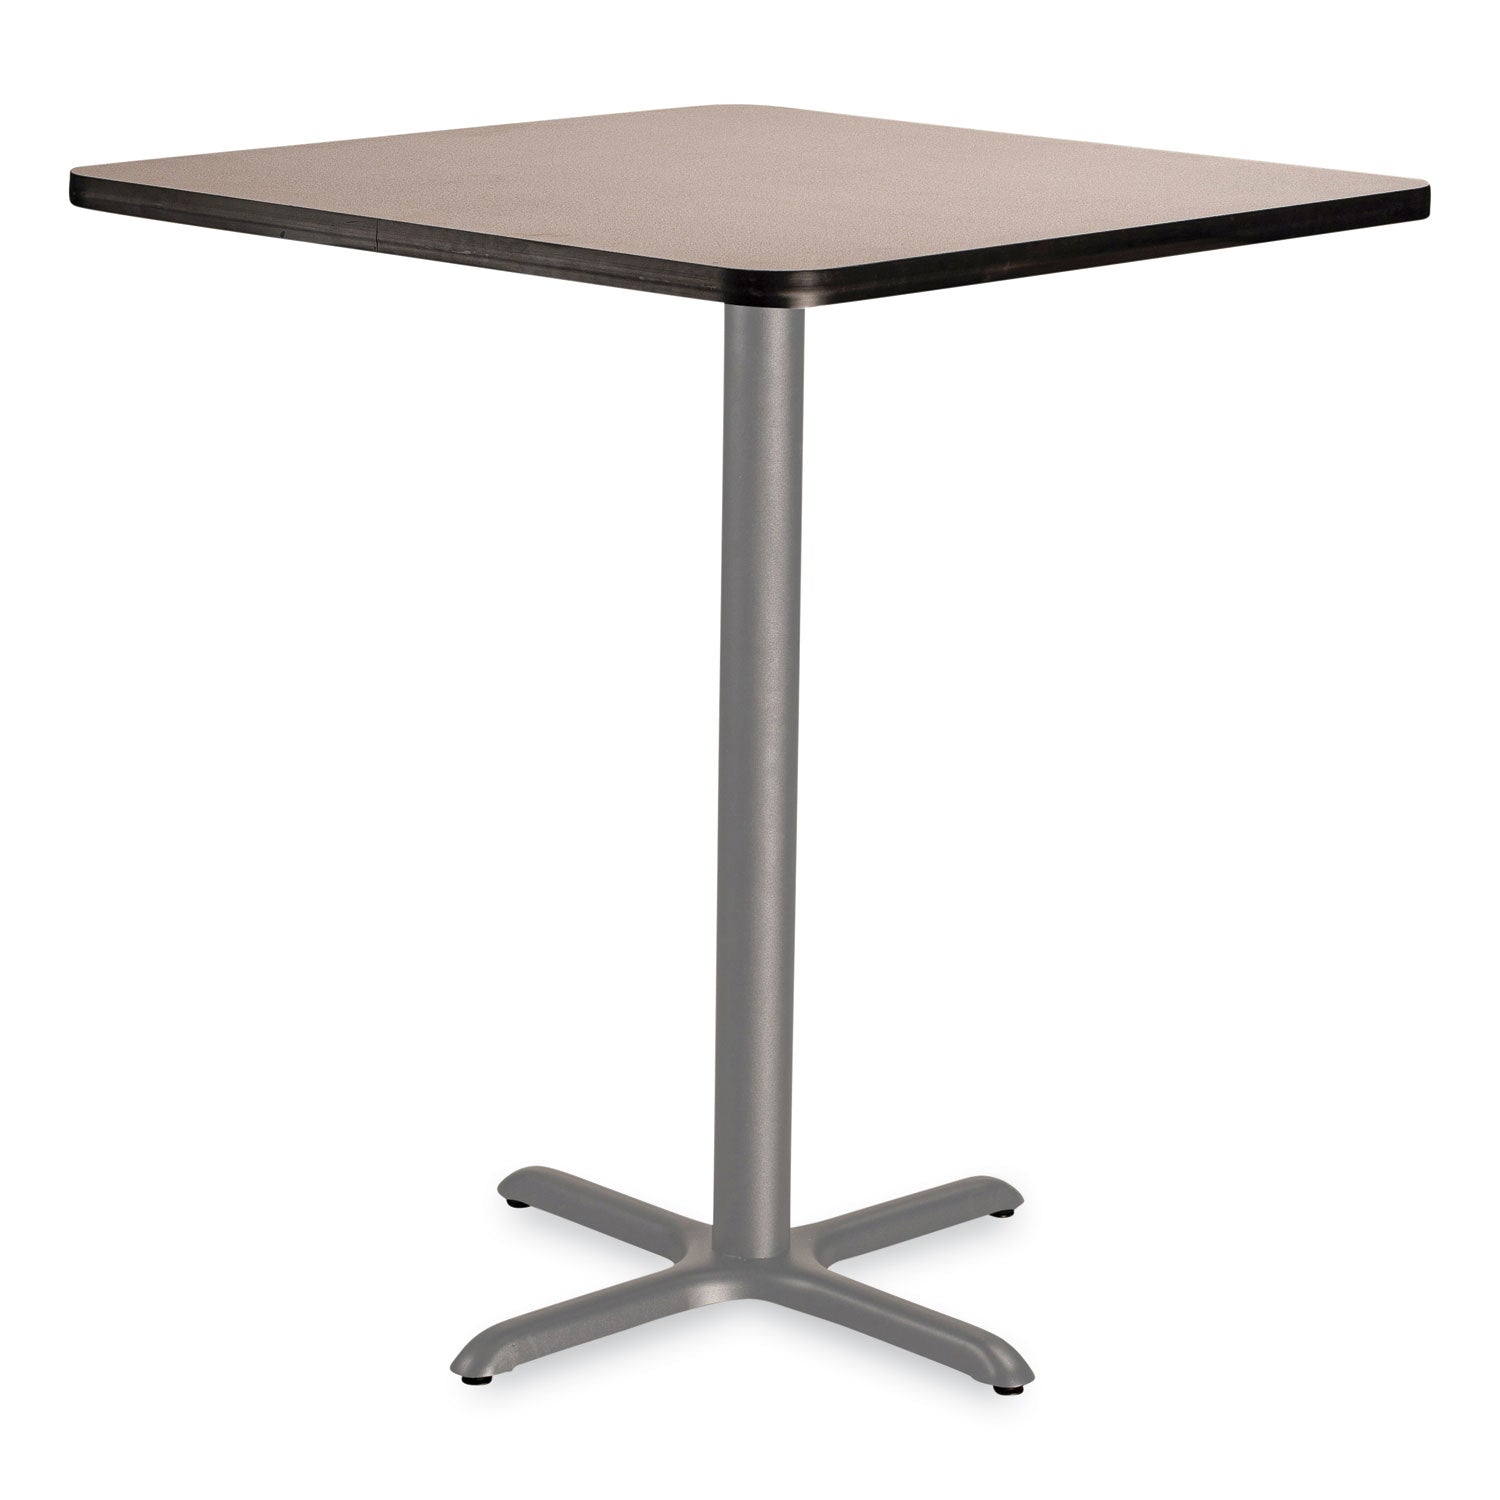 cafe-table-36w-x-36d-x-42h-square-top-x-base-gray-nebula-top-gray-base-ships-in-7-10-business-days_npscg33636xb1gy - 1